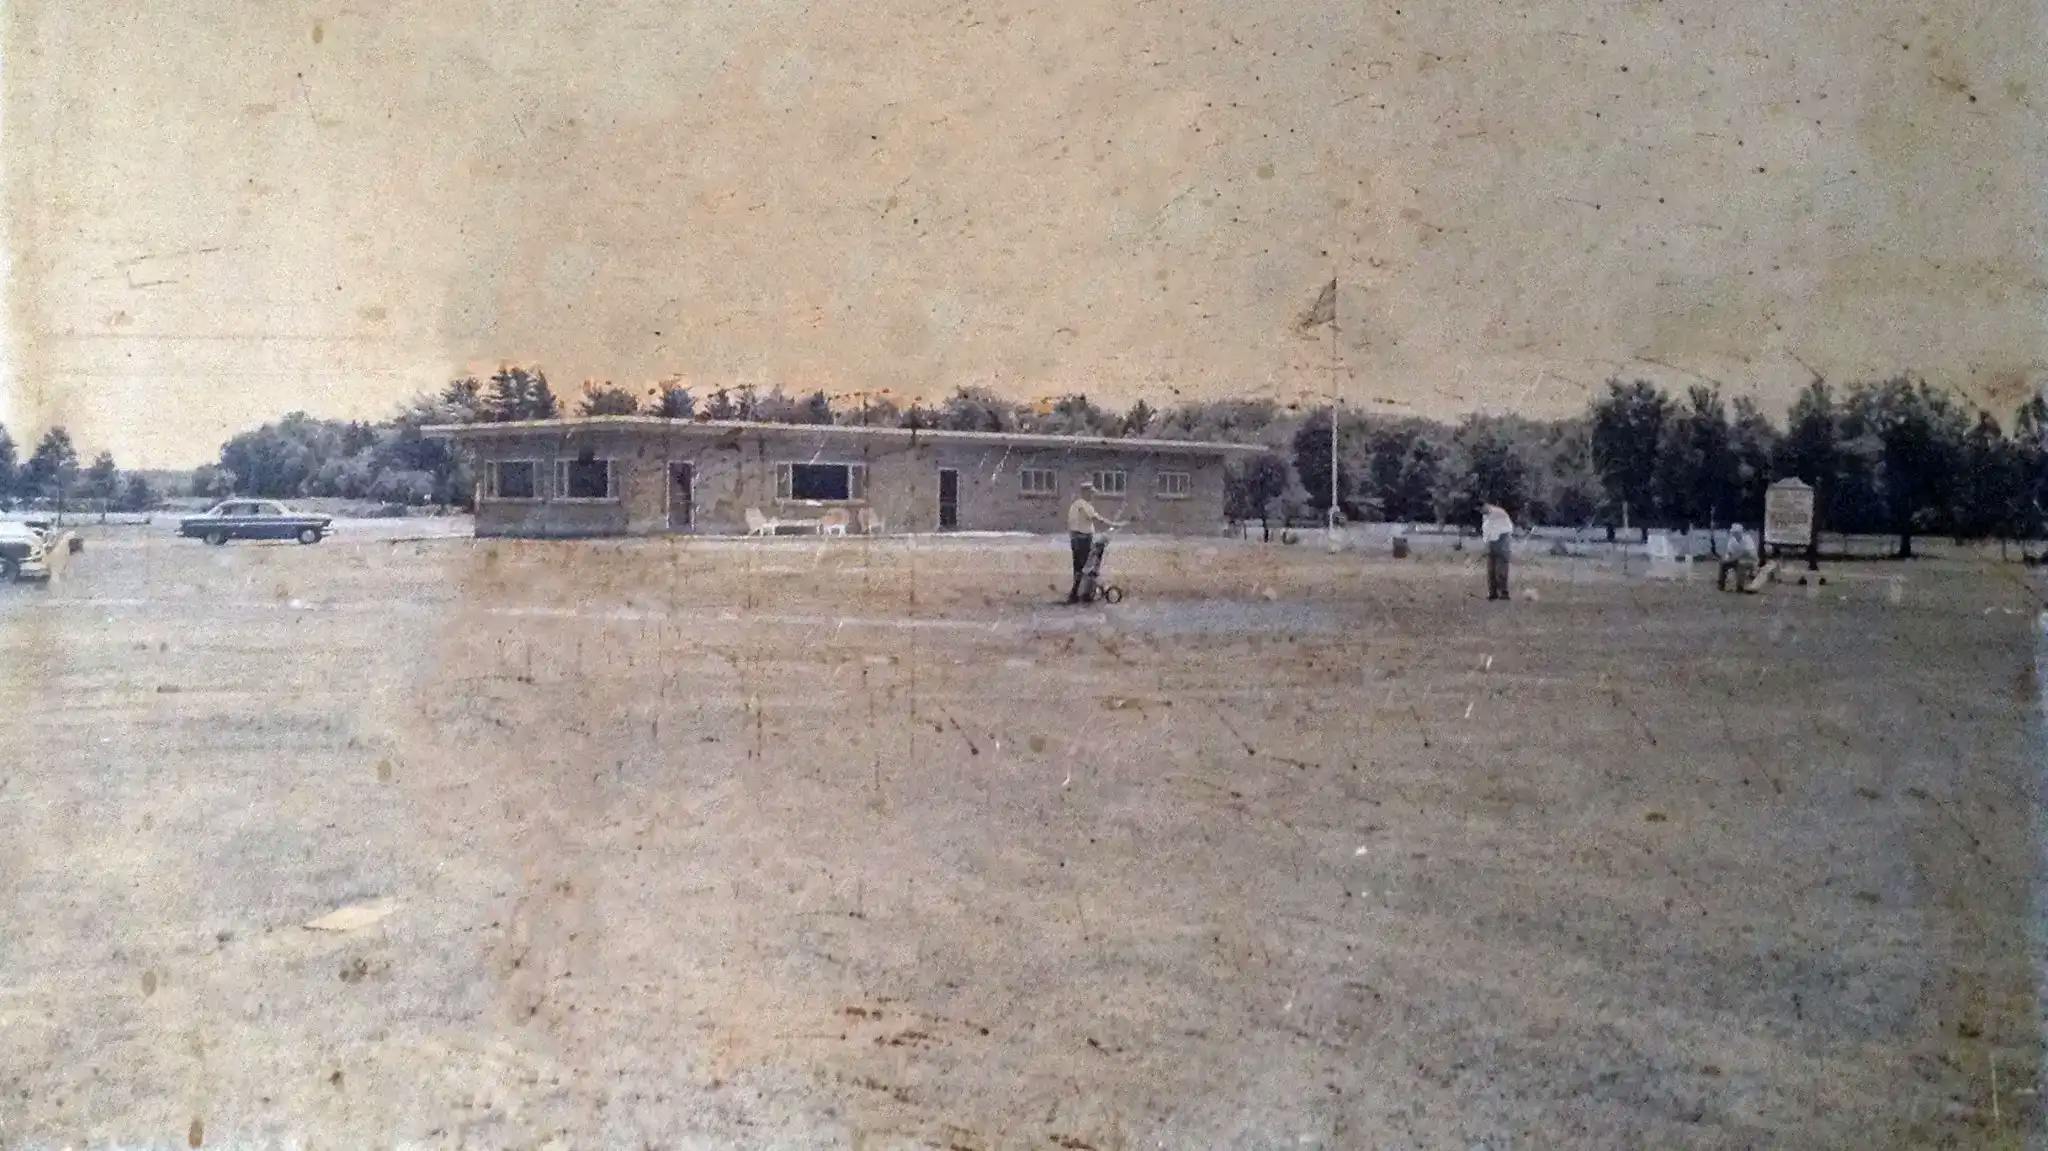 The newly completed clubhouse in 1954.